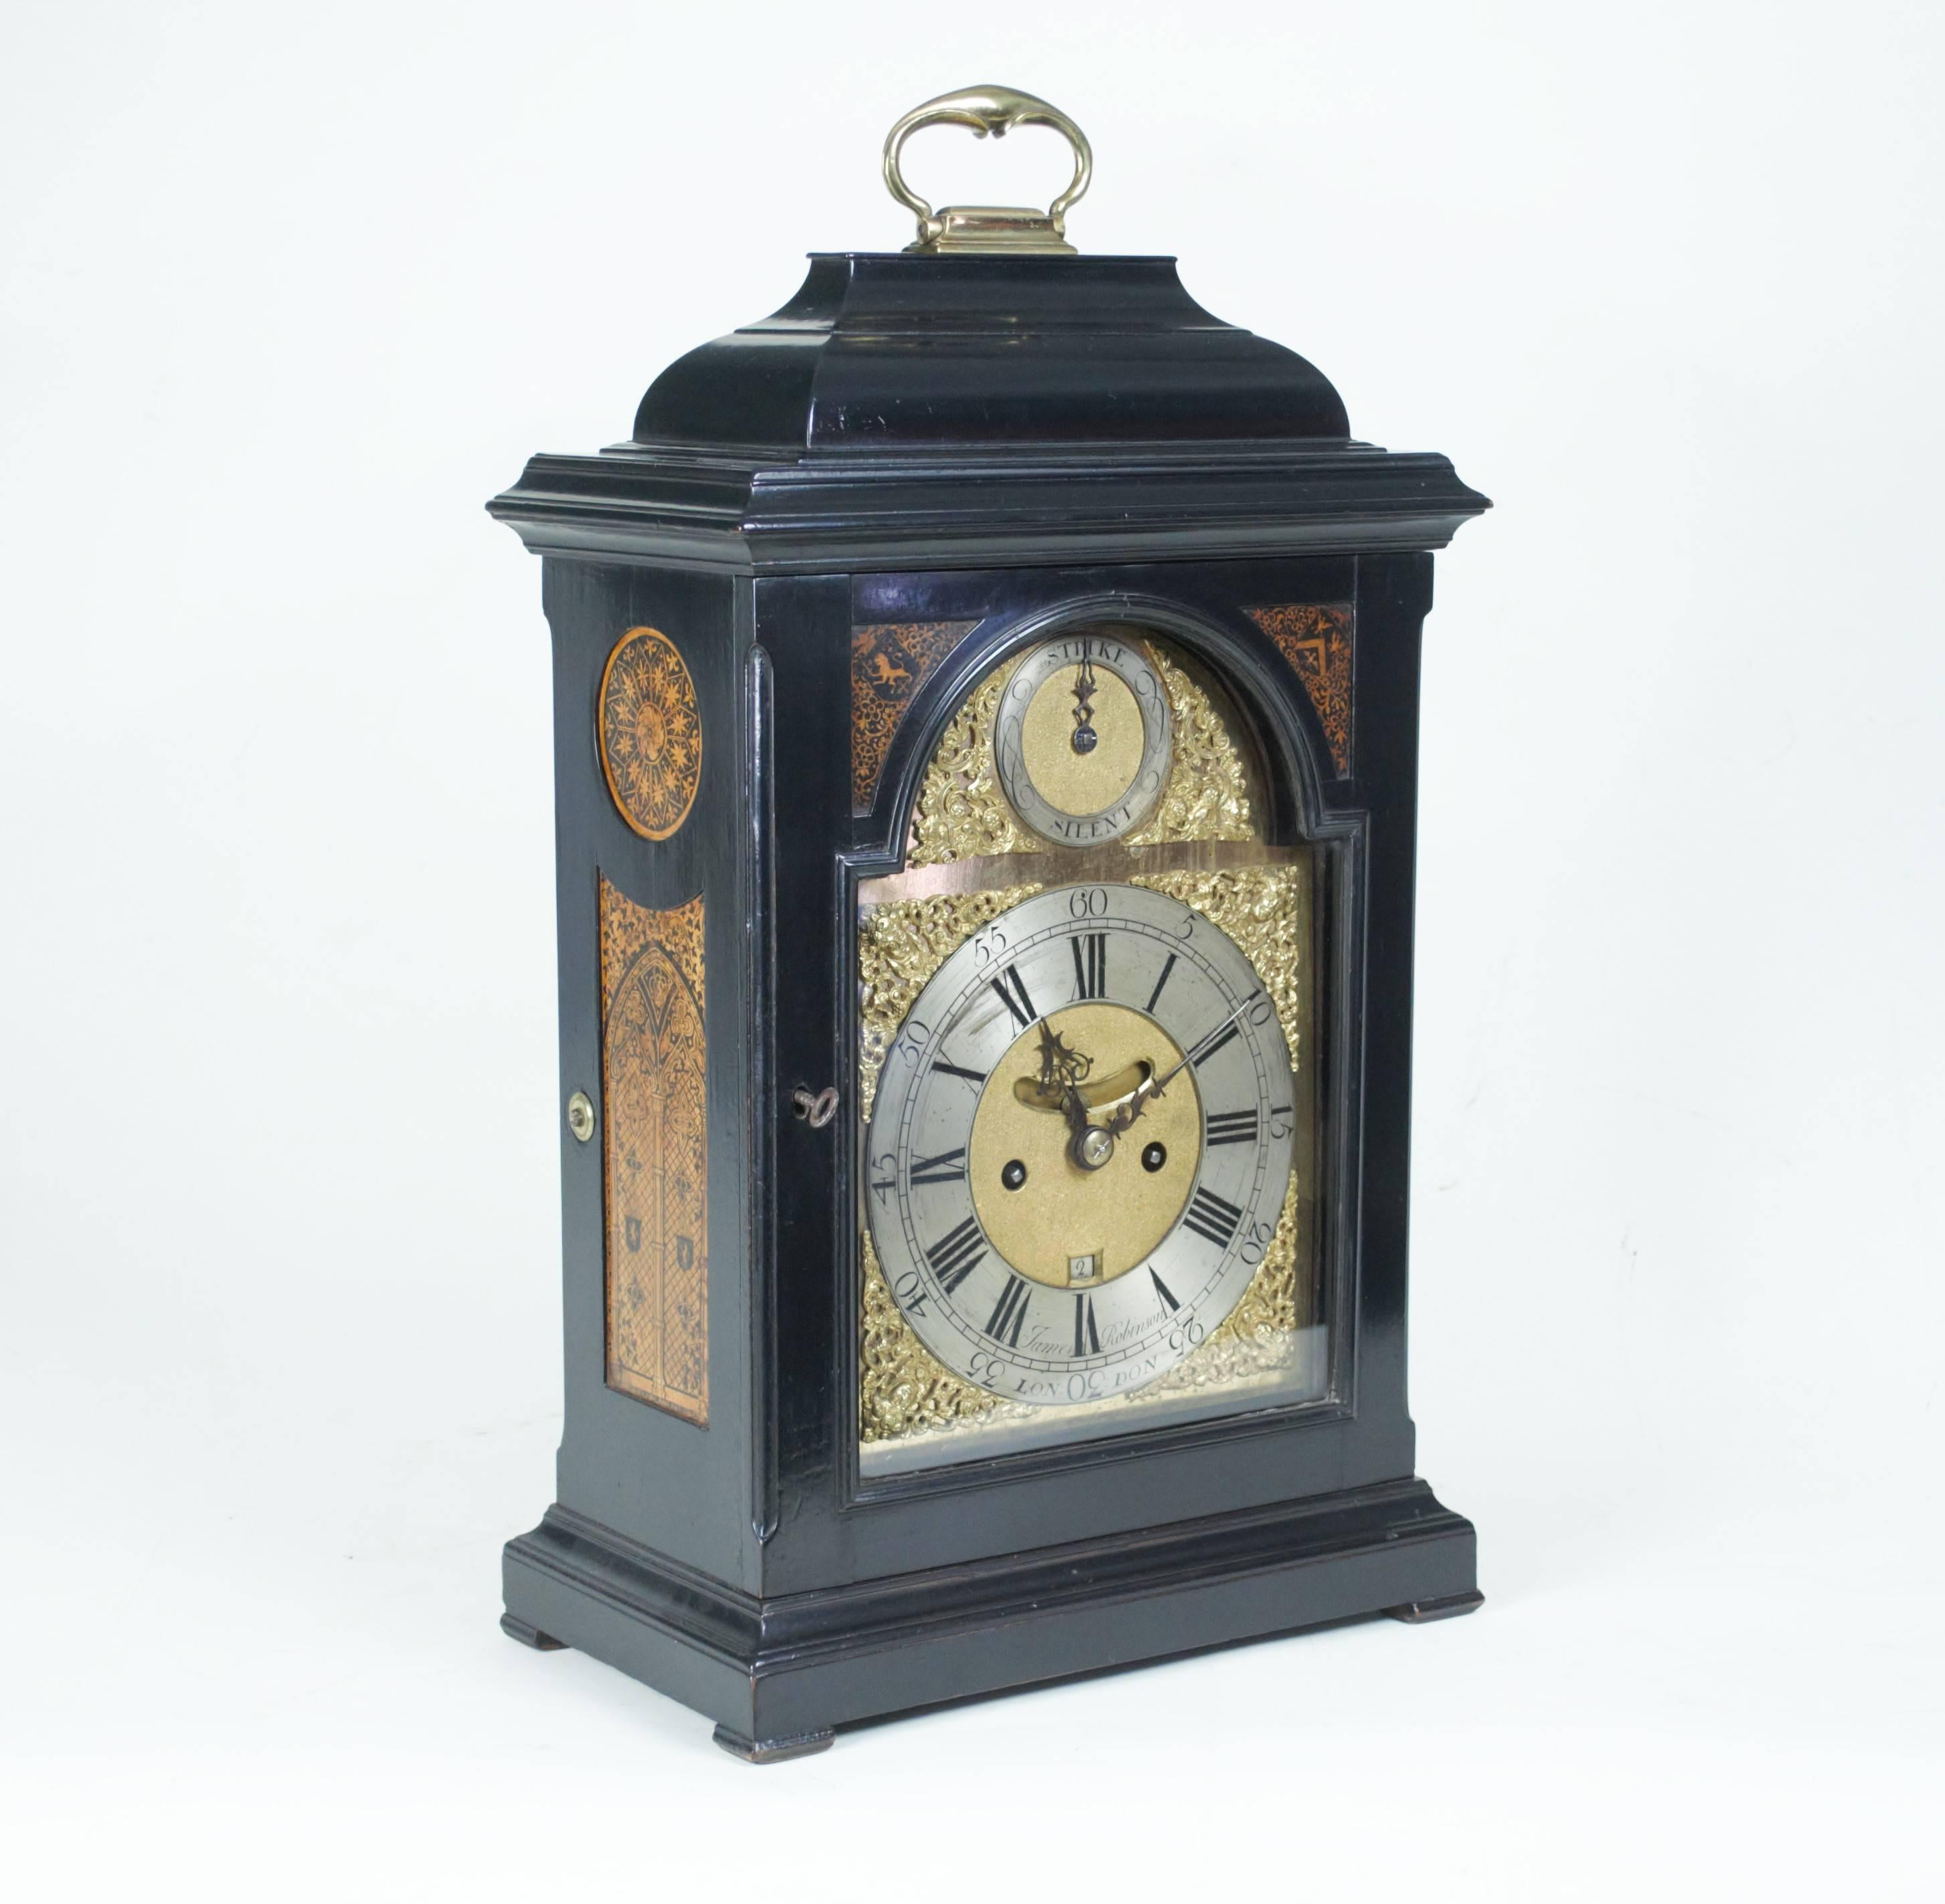 A mid-18th century cushion-top ebonized table clock, the case with pen-work panels enclosing an eight day chiming movement with finely engraved back-plate. Silvered dial with Roman numerals and gilt spandrels, stike/silent dial, pendulum and date